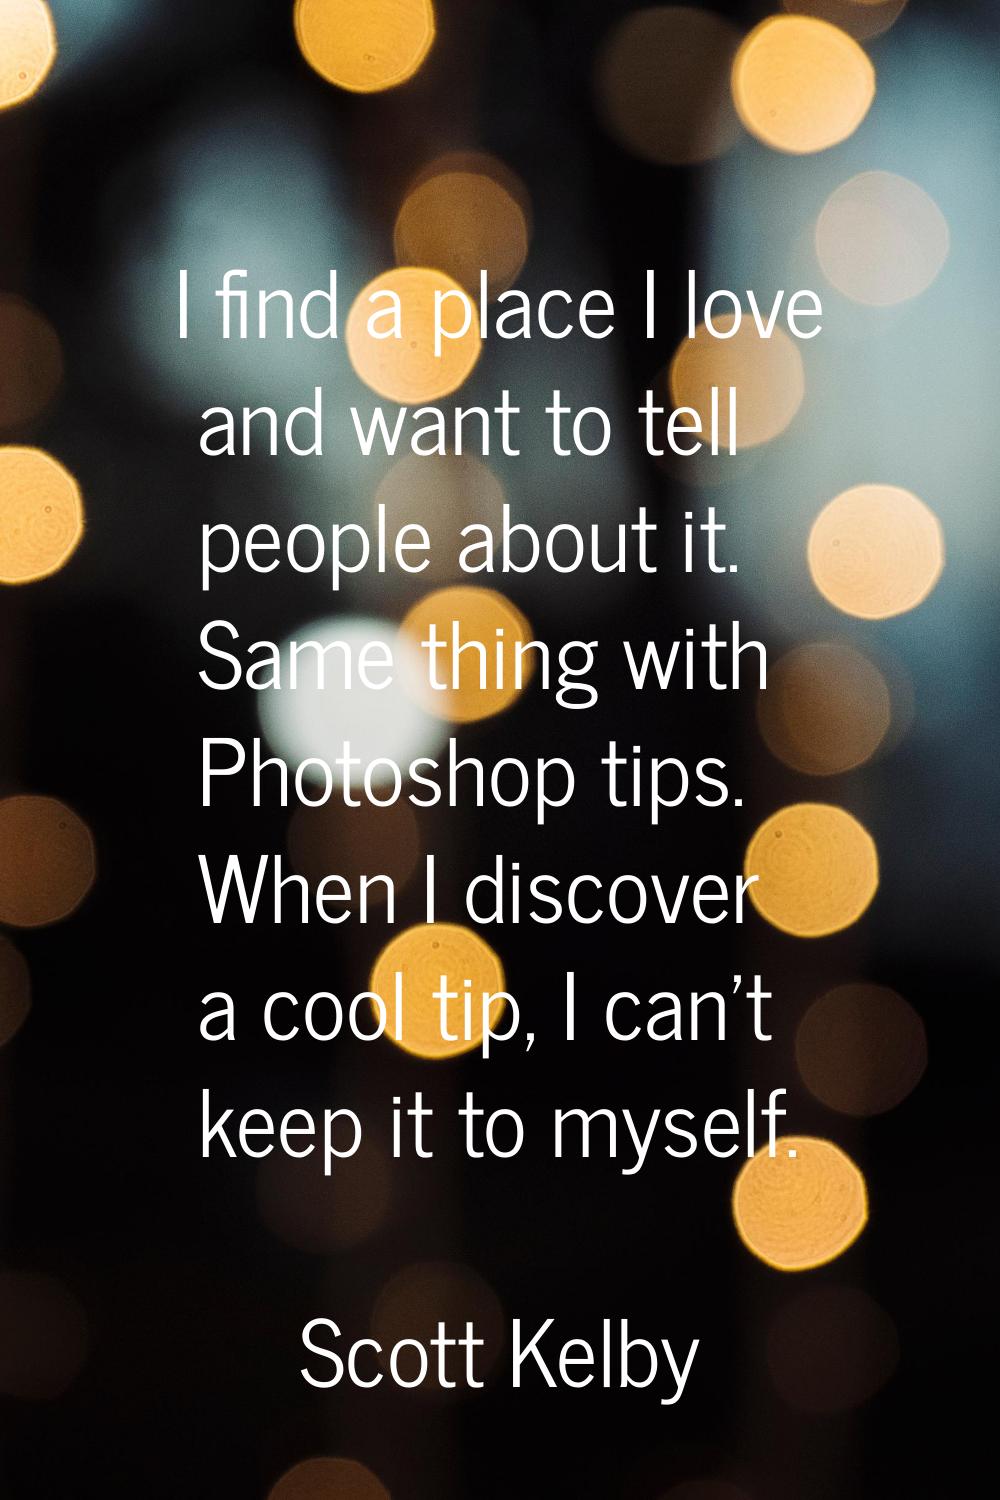 I find a place I love and want to tell people about it. Same thing with Photoshop tips. When I disc